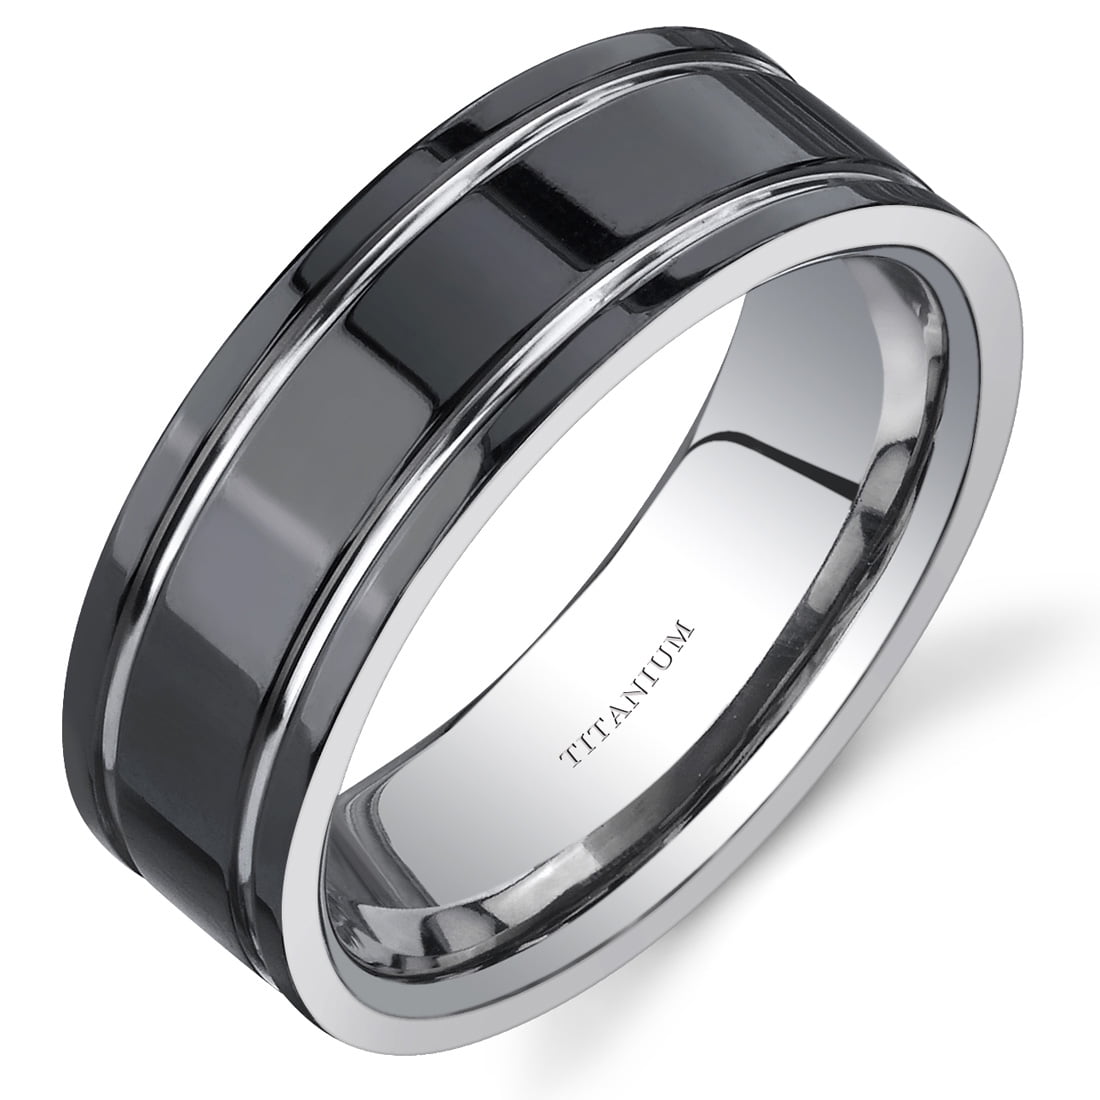 Oravo Men's 8mm Black and Silver Tone Comfort Fit Wedding Band Ring